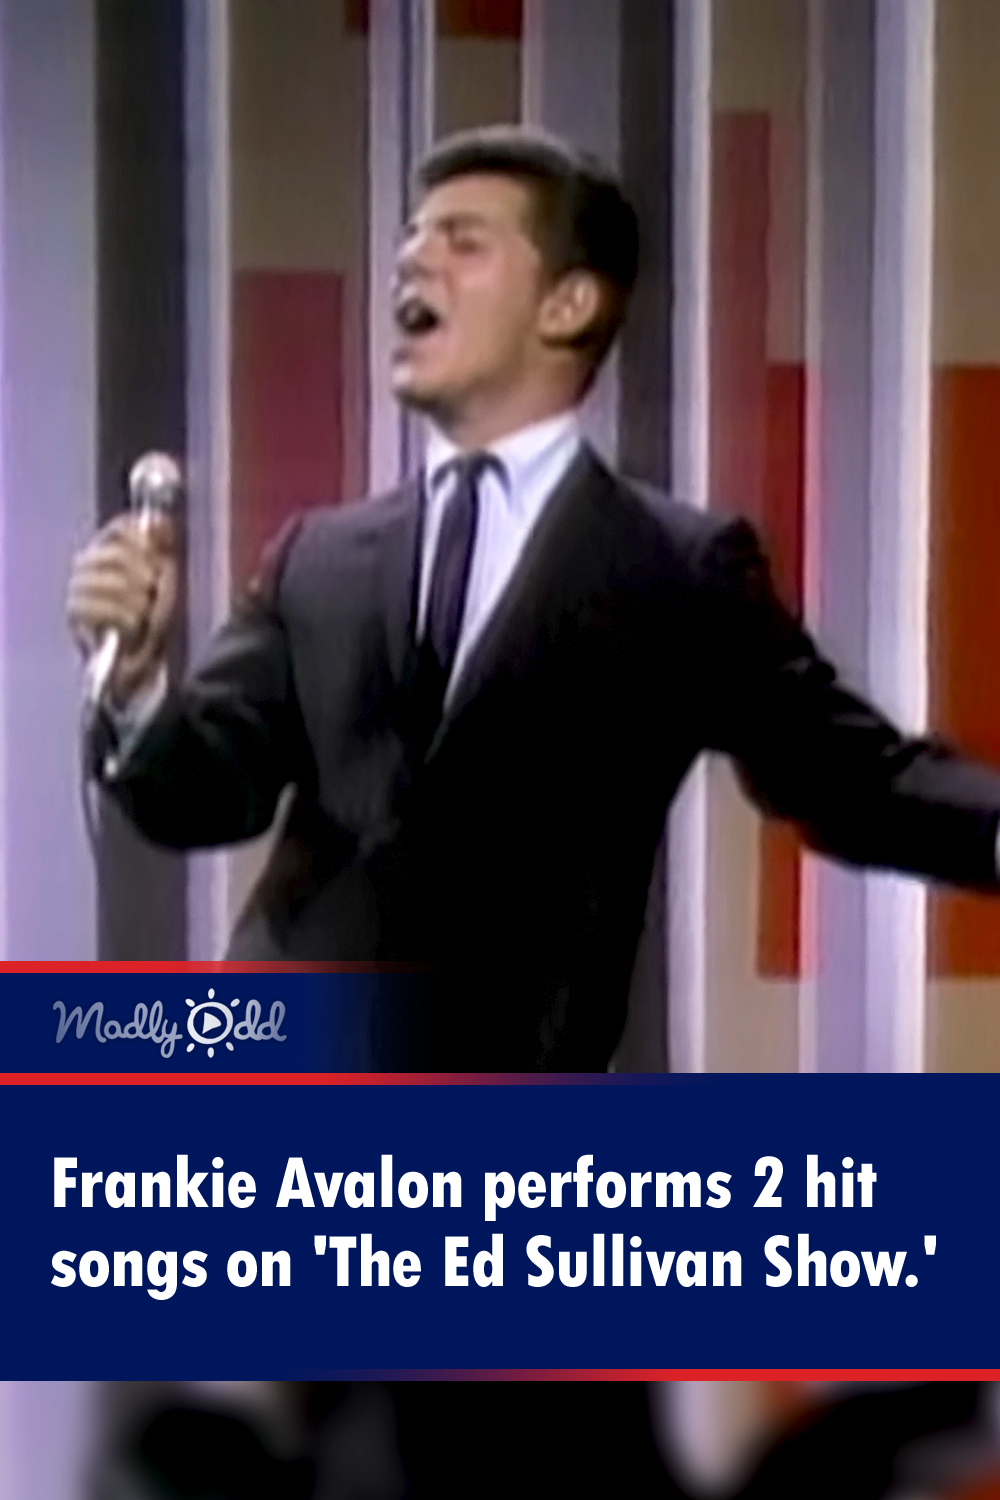 Frankie Avalon performs 2 hit songs on \'The Ed Sullivan Show\'